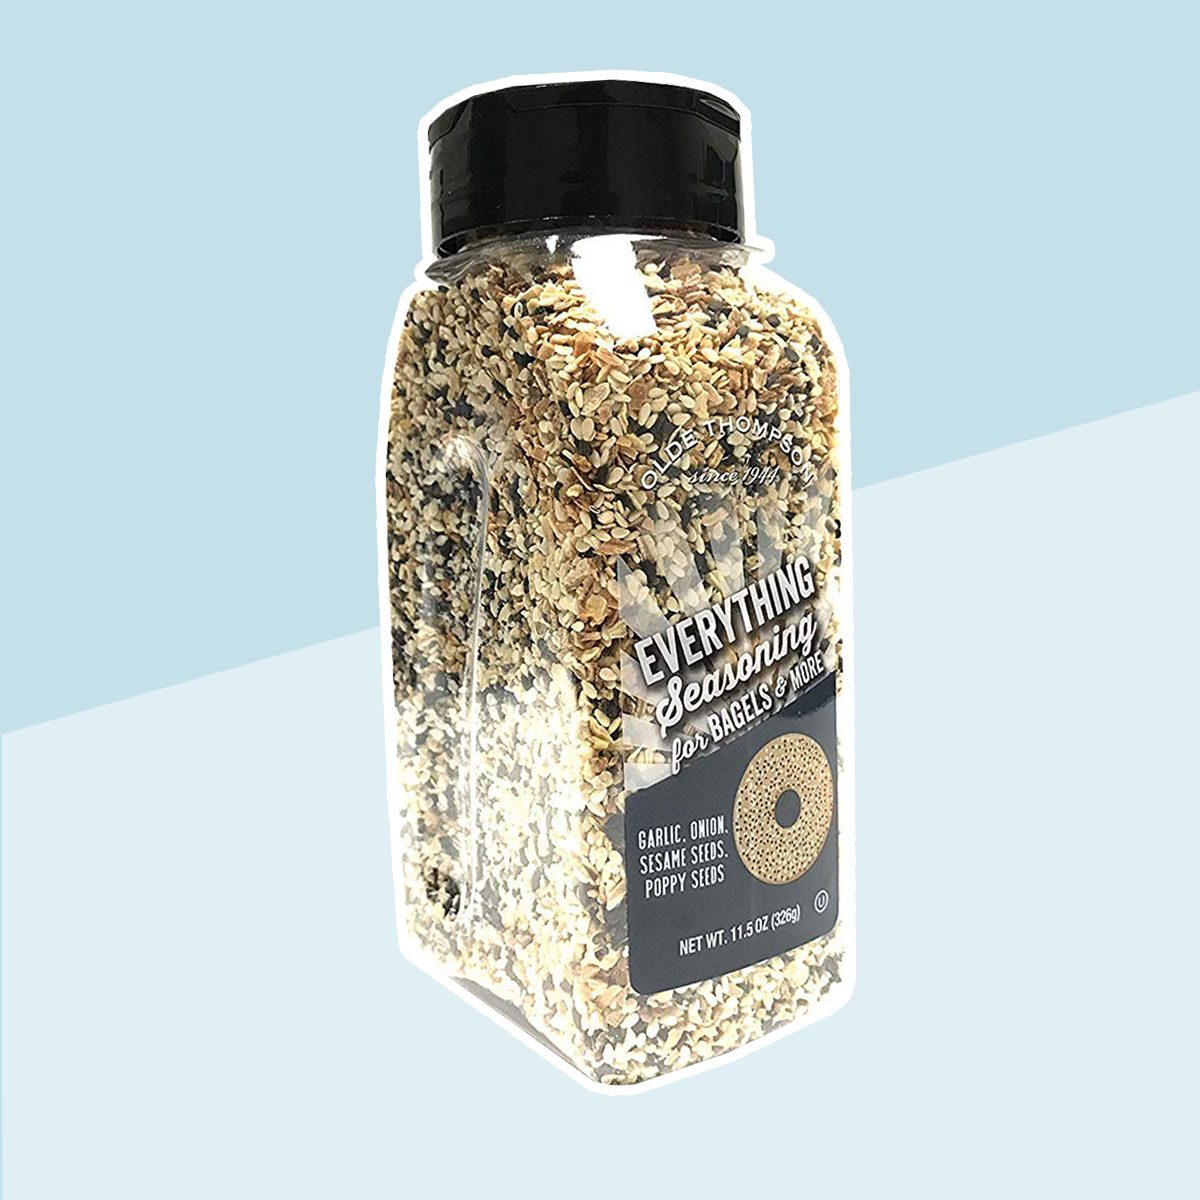 Save on Noble Made Seasoning Everything Bagel Organic Order Online Delivery